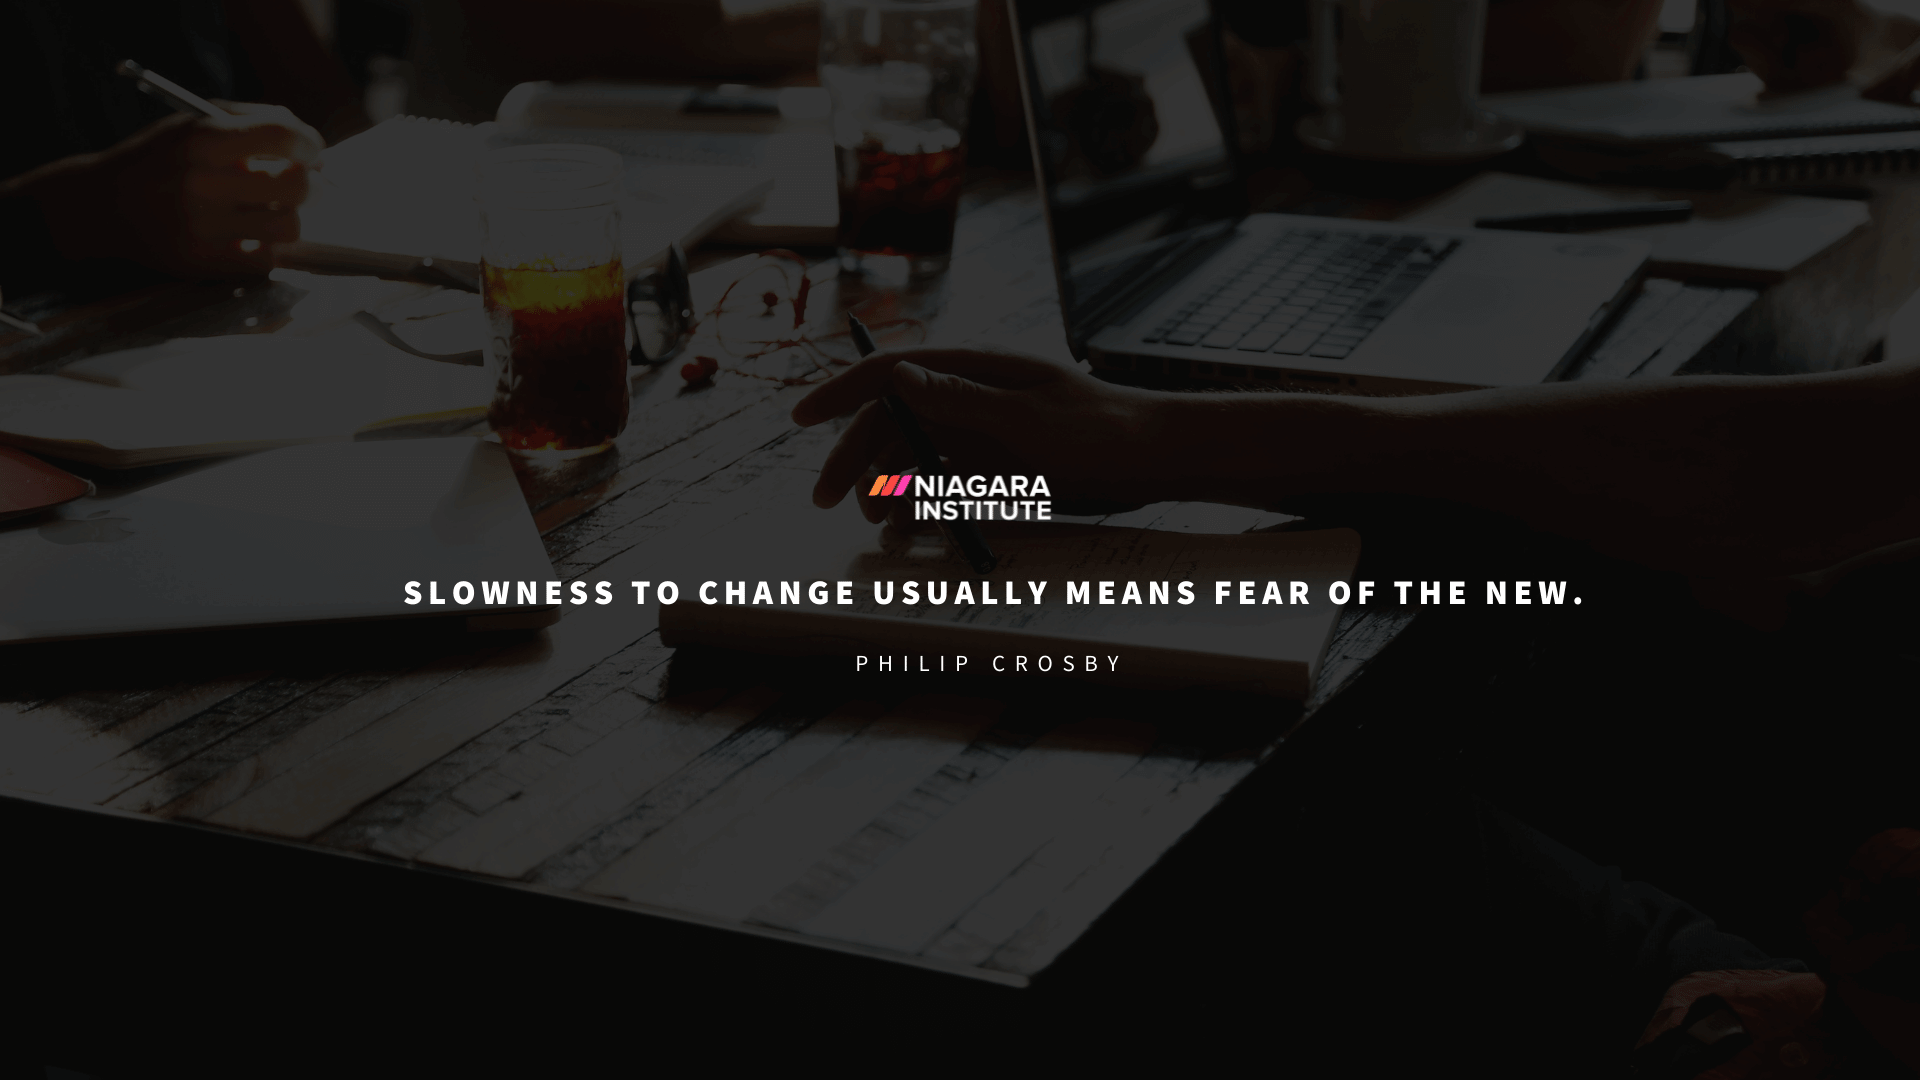 Quotes About Improving Processes Slowness to change usually means fear of the new.